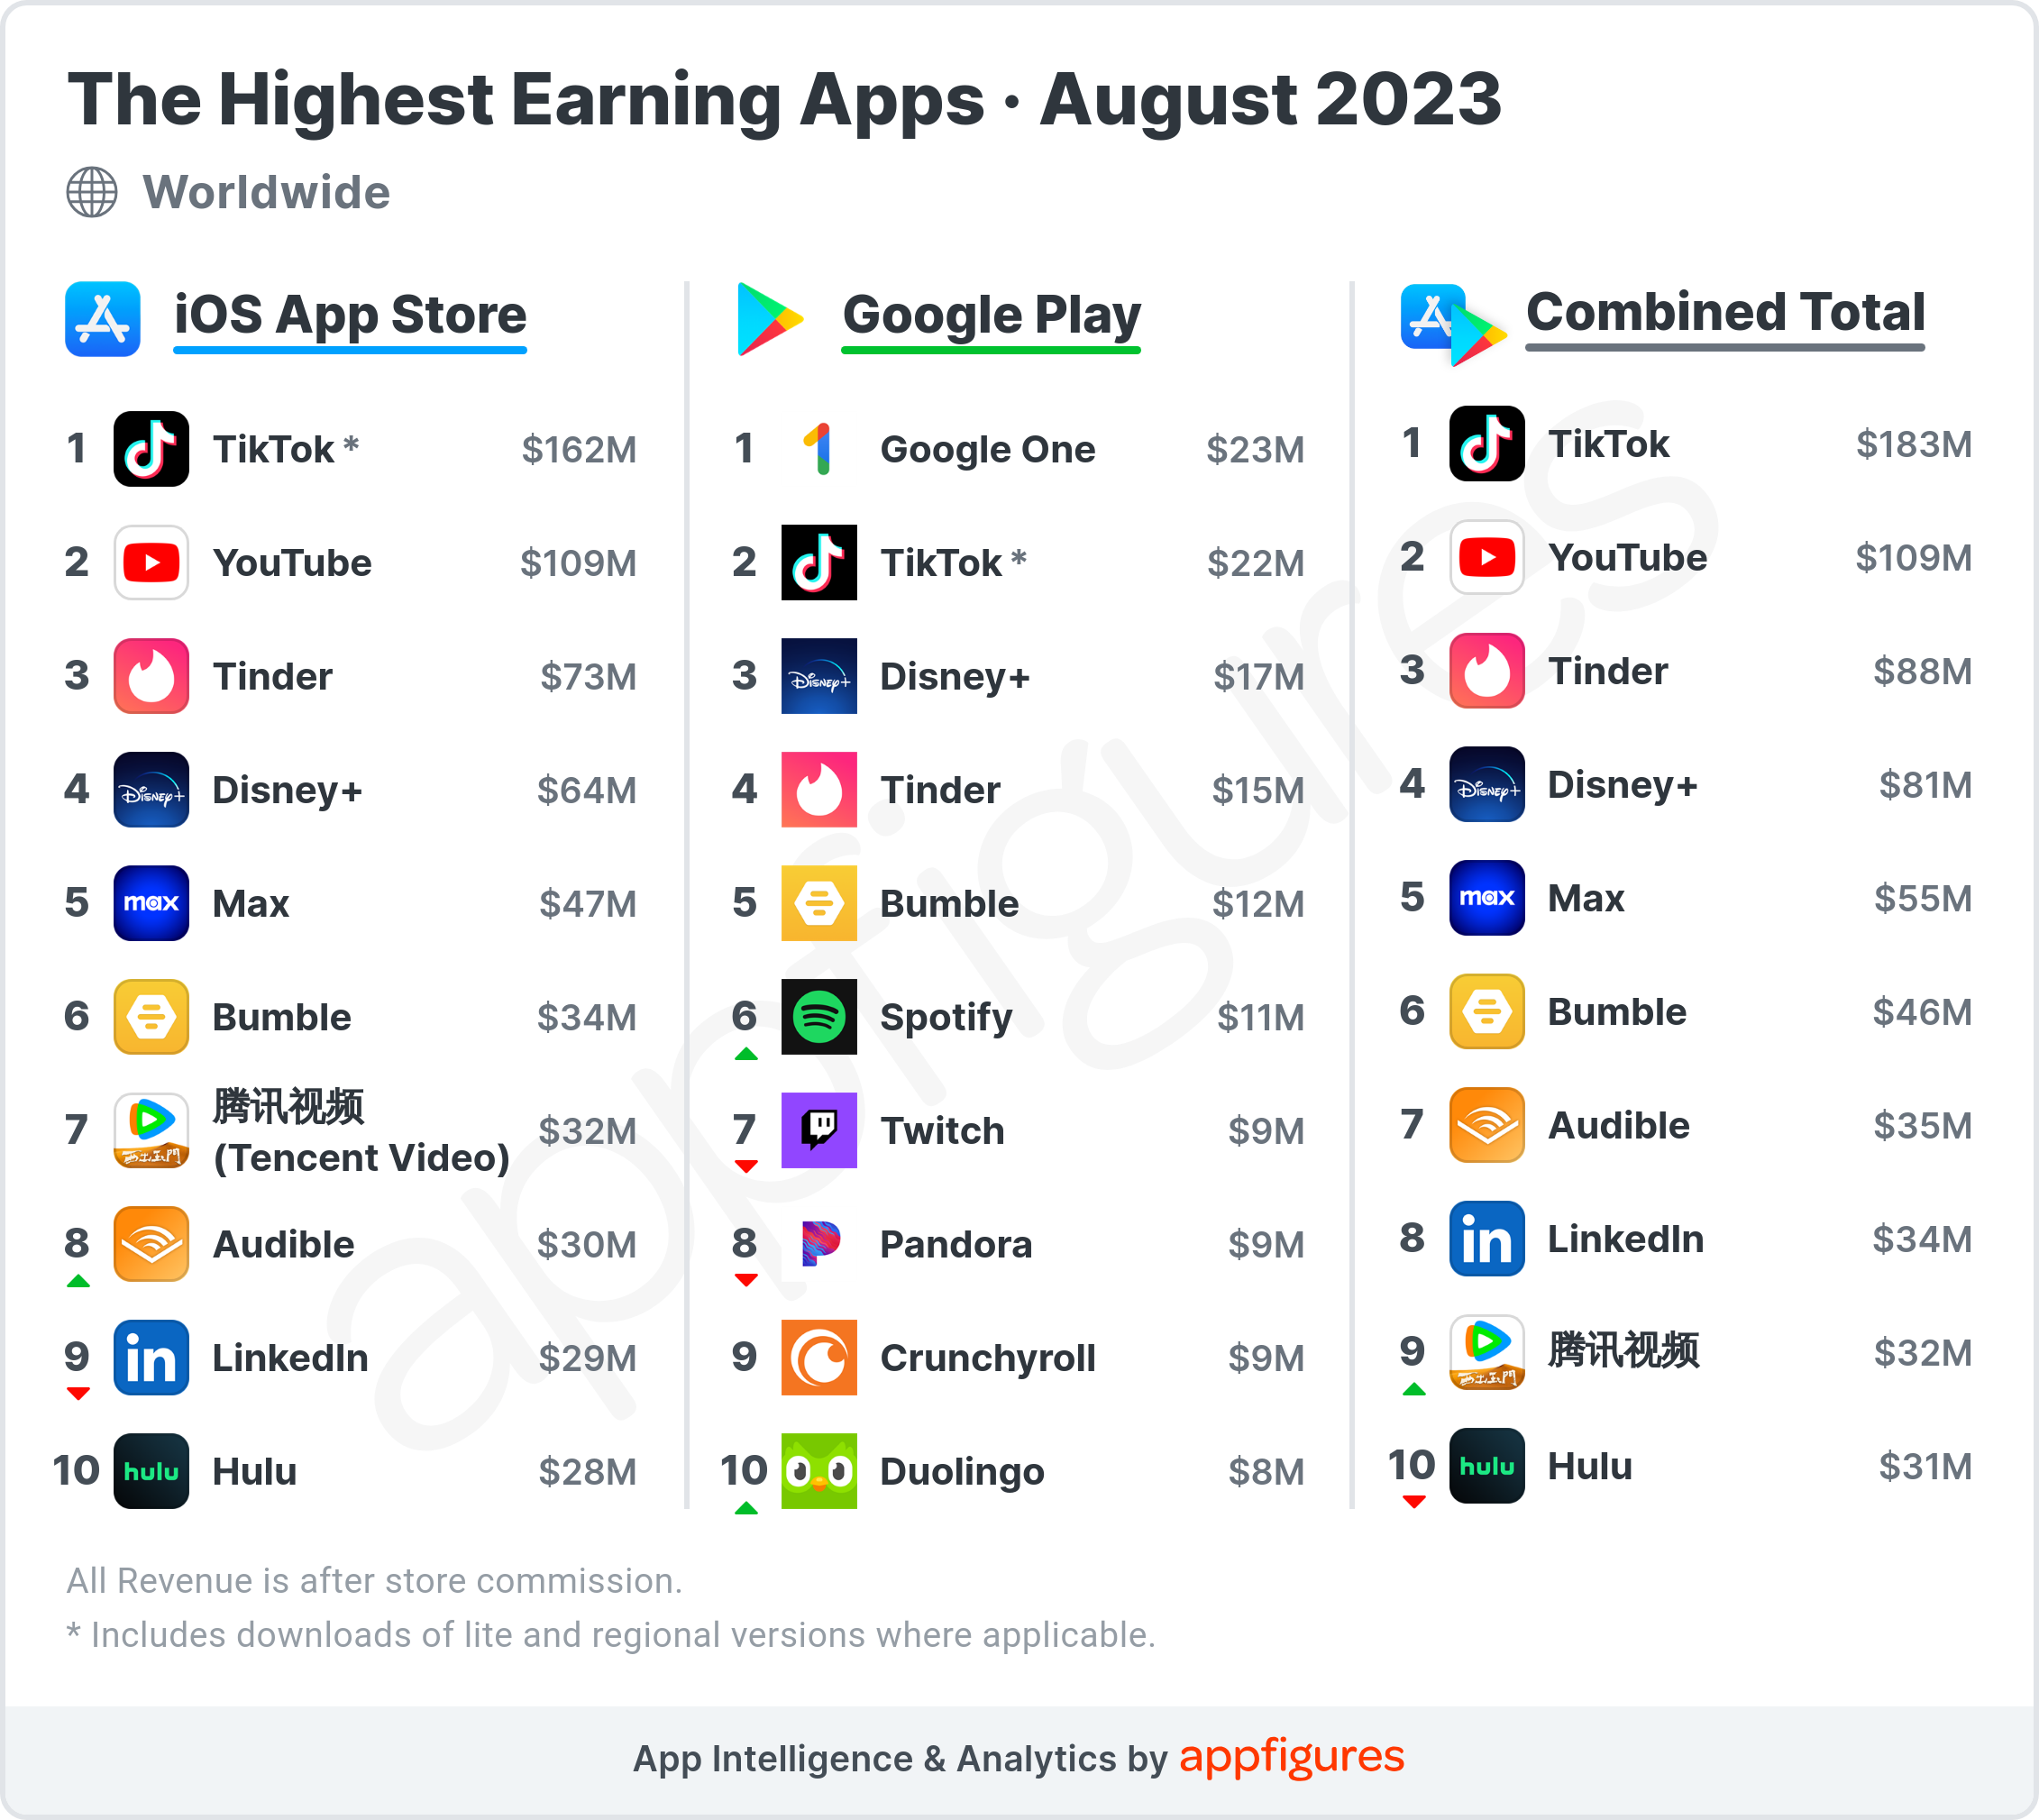 Highest earning mobile apps in the world in August 2023